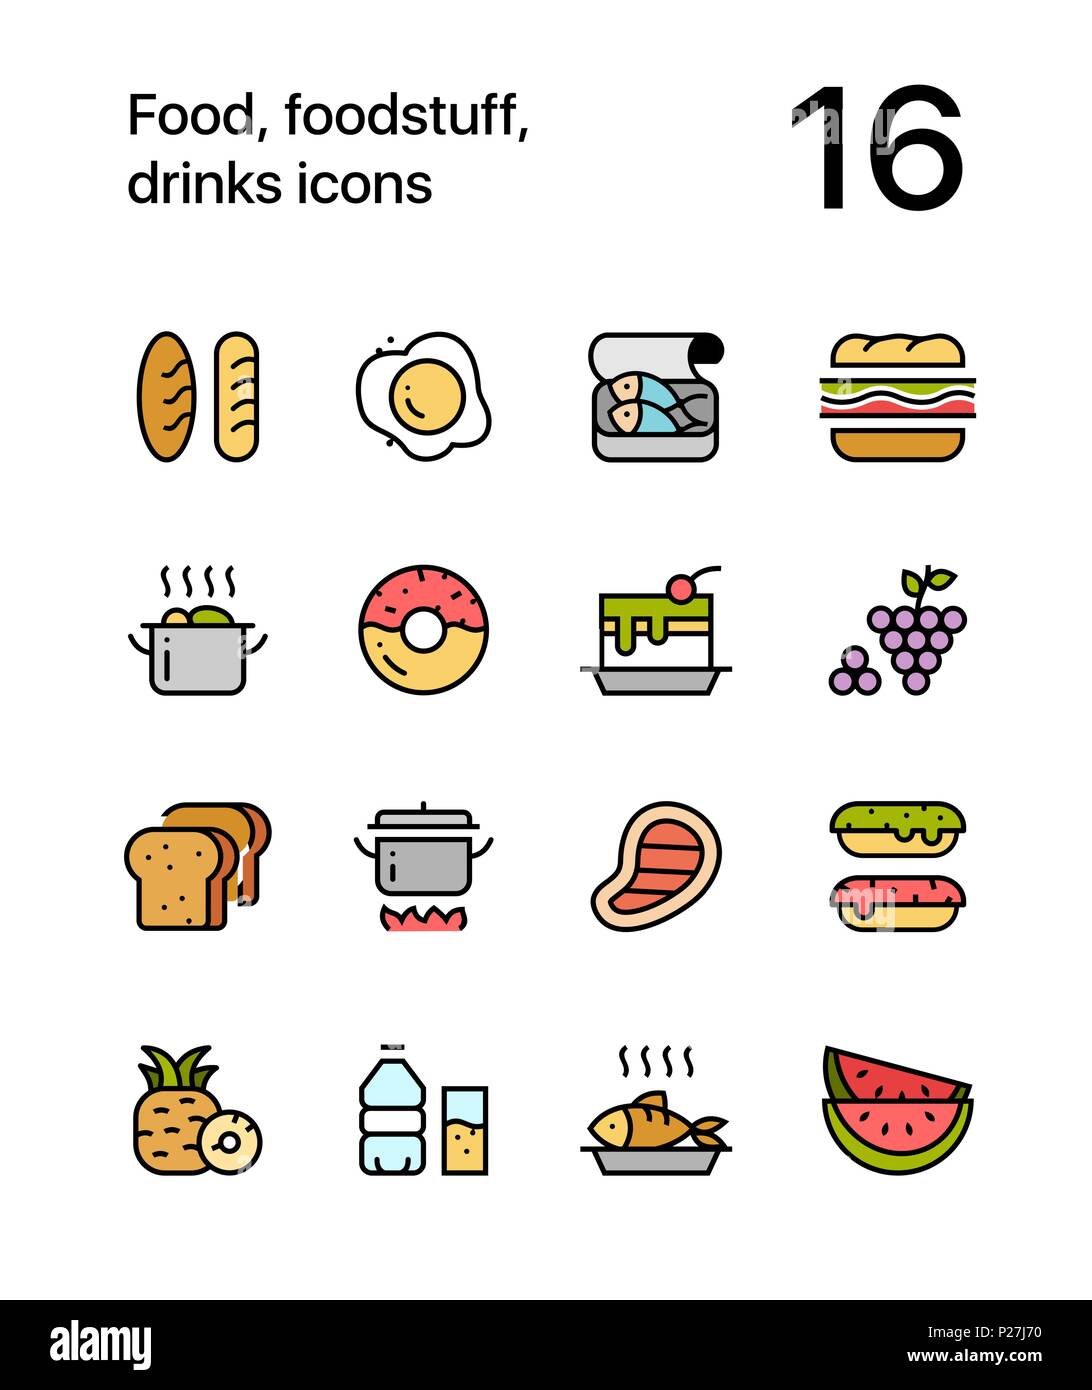 Colored Food, foodstuff, drinks icons for web and mobile design pack 1 Stock Vector